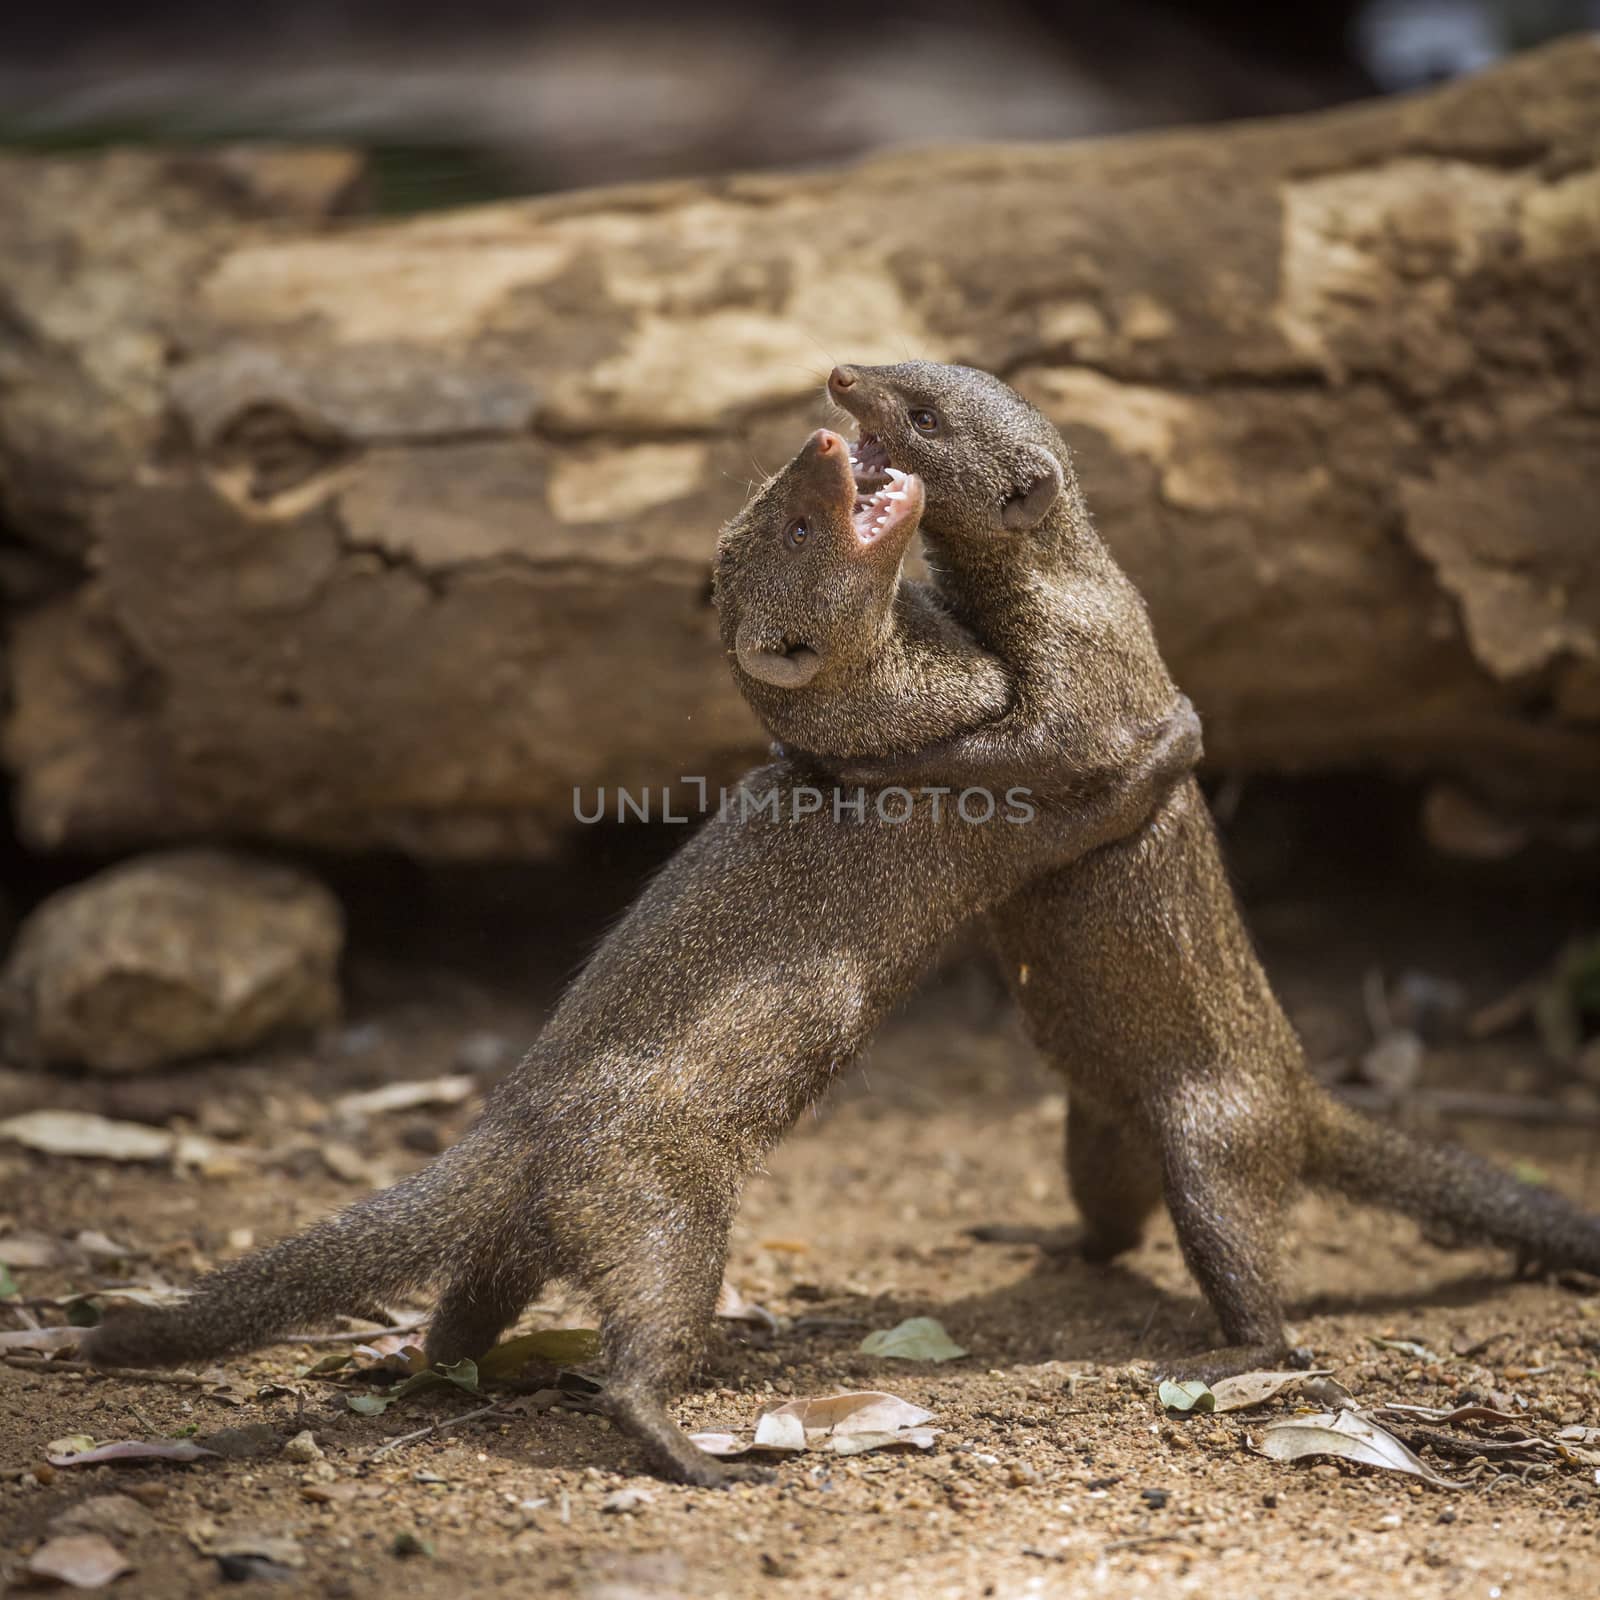 Common dwarf mongoose in Kruger National park, South Africa by PACOCOMO